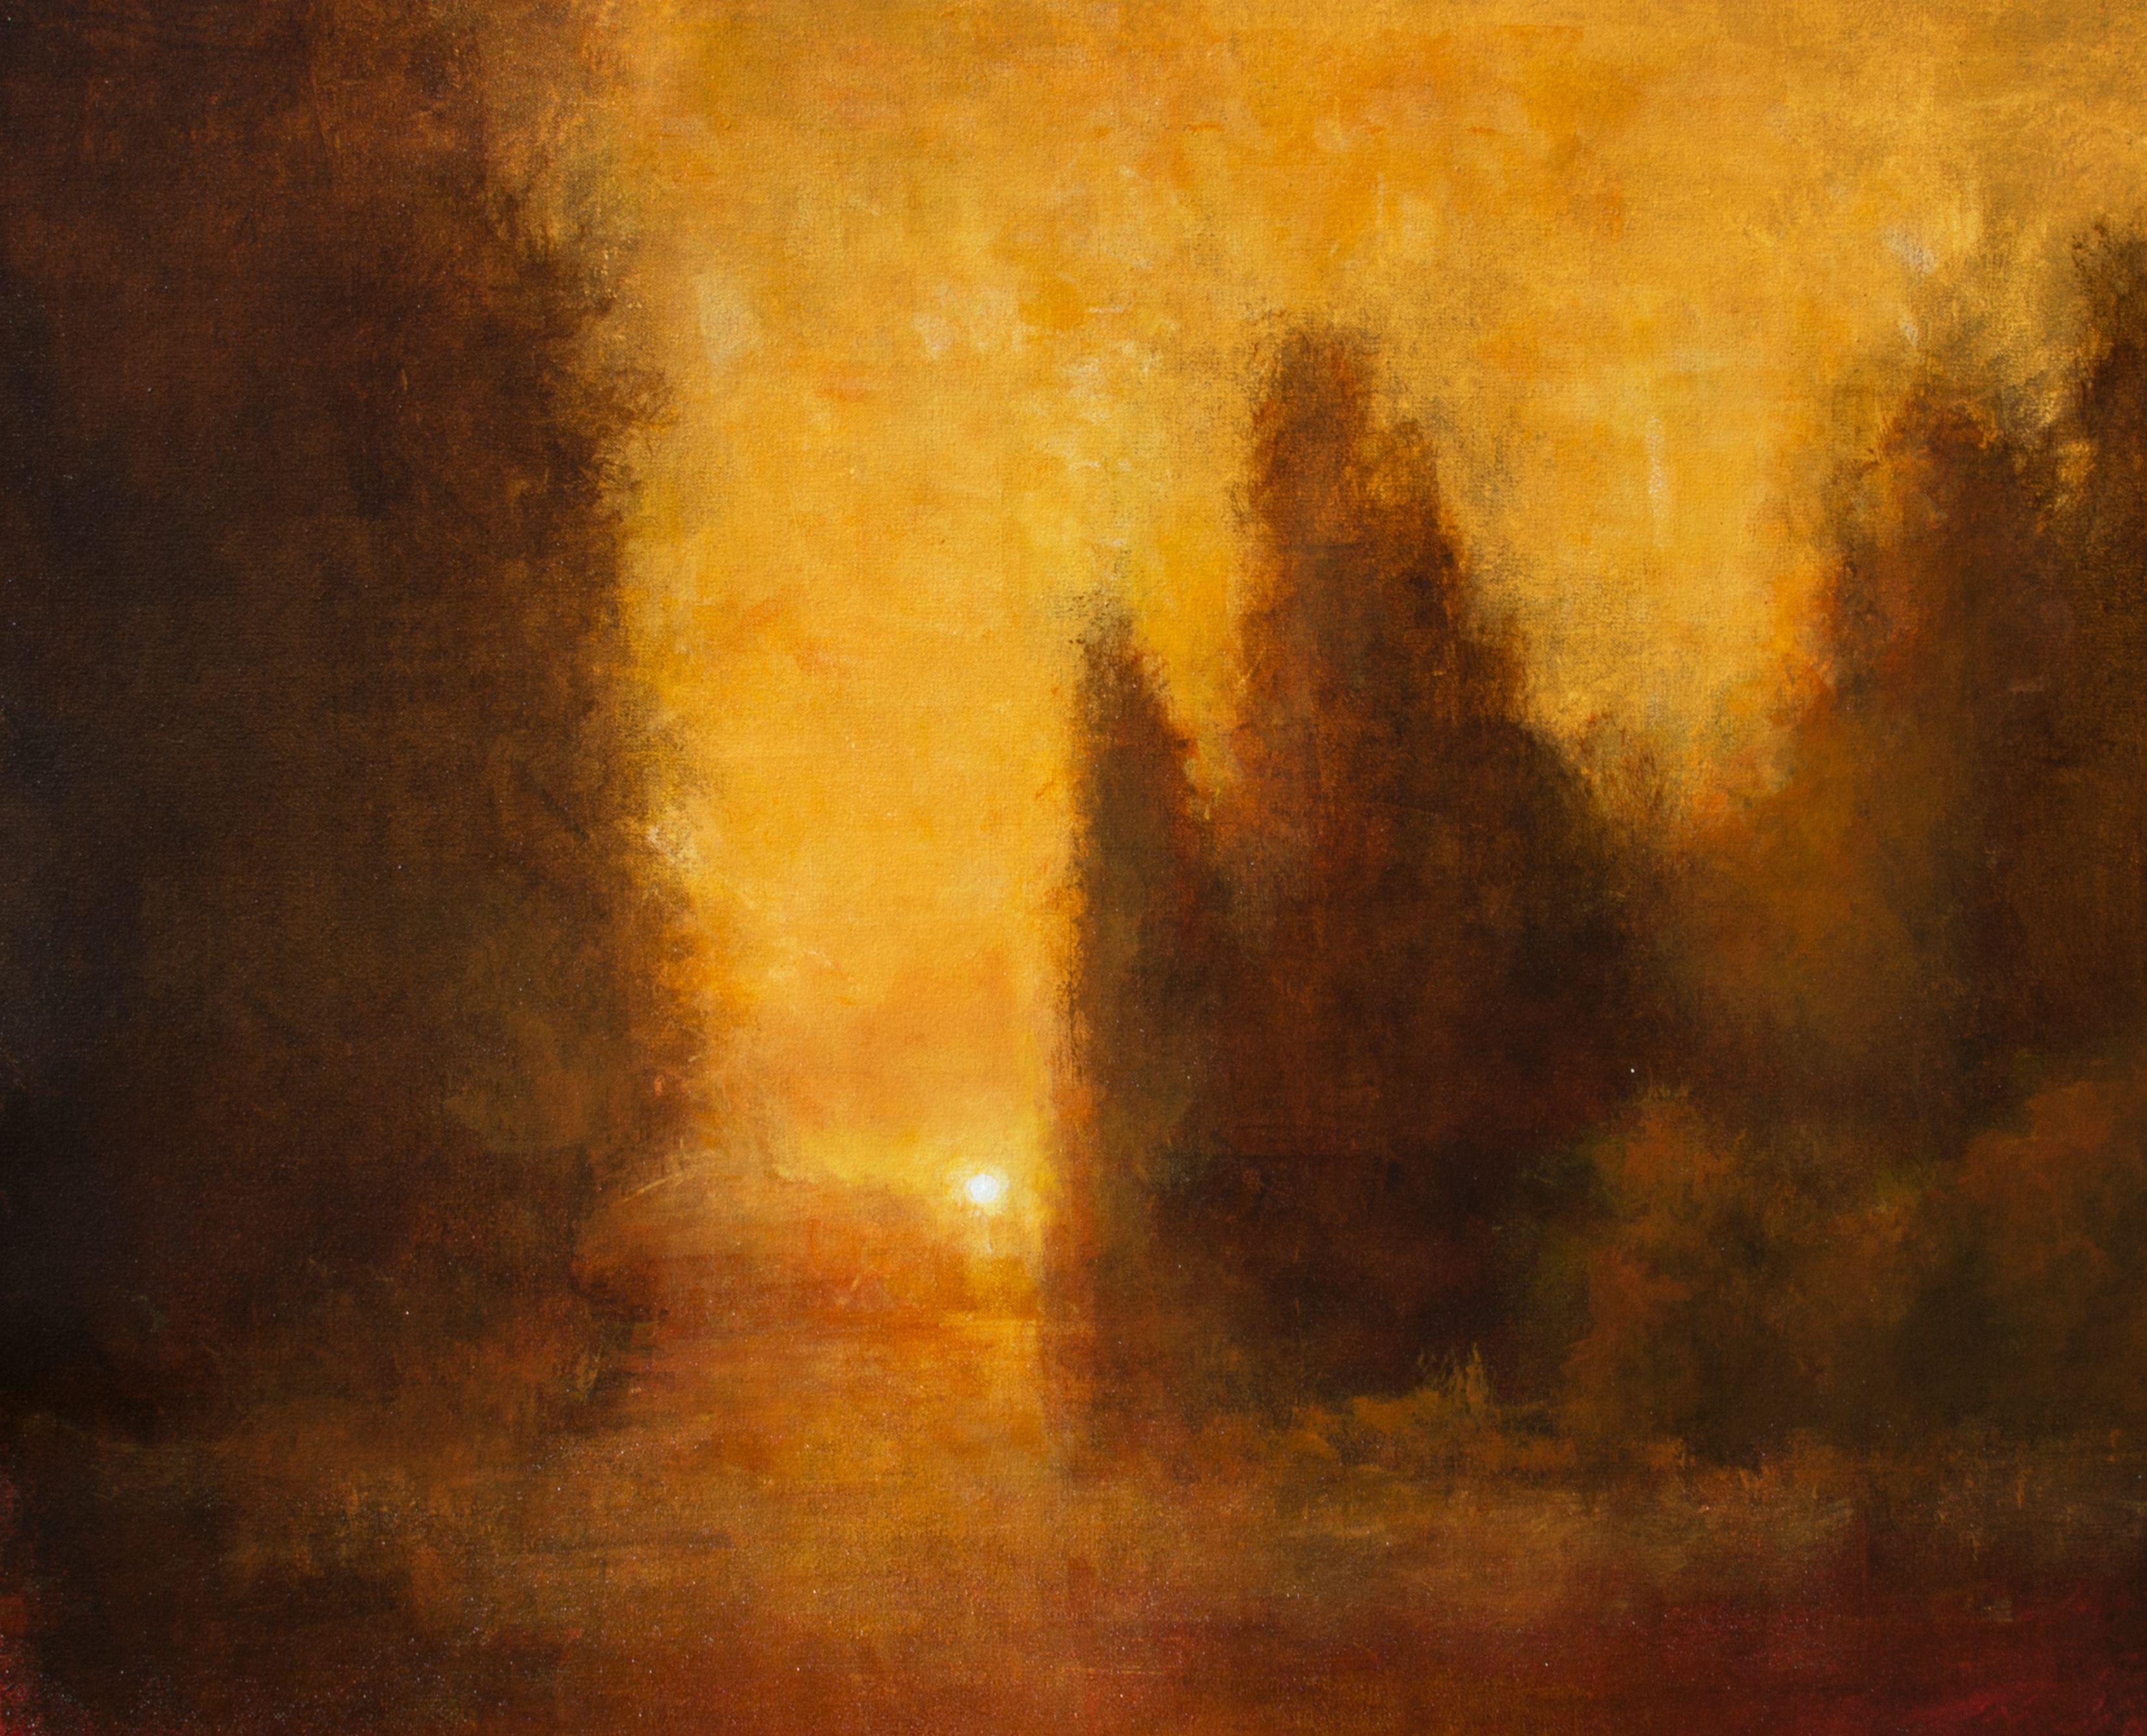 Glowing Sunset  Tonal impressionist landscape painting.    Acrylics on gallery wrapped canvas, 24x30 inches  Ready To Hang    Glowing Sunset was created using thin layers of transparent glazing to create the rich soft light of a misty evening. This